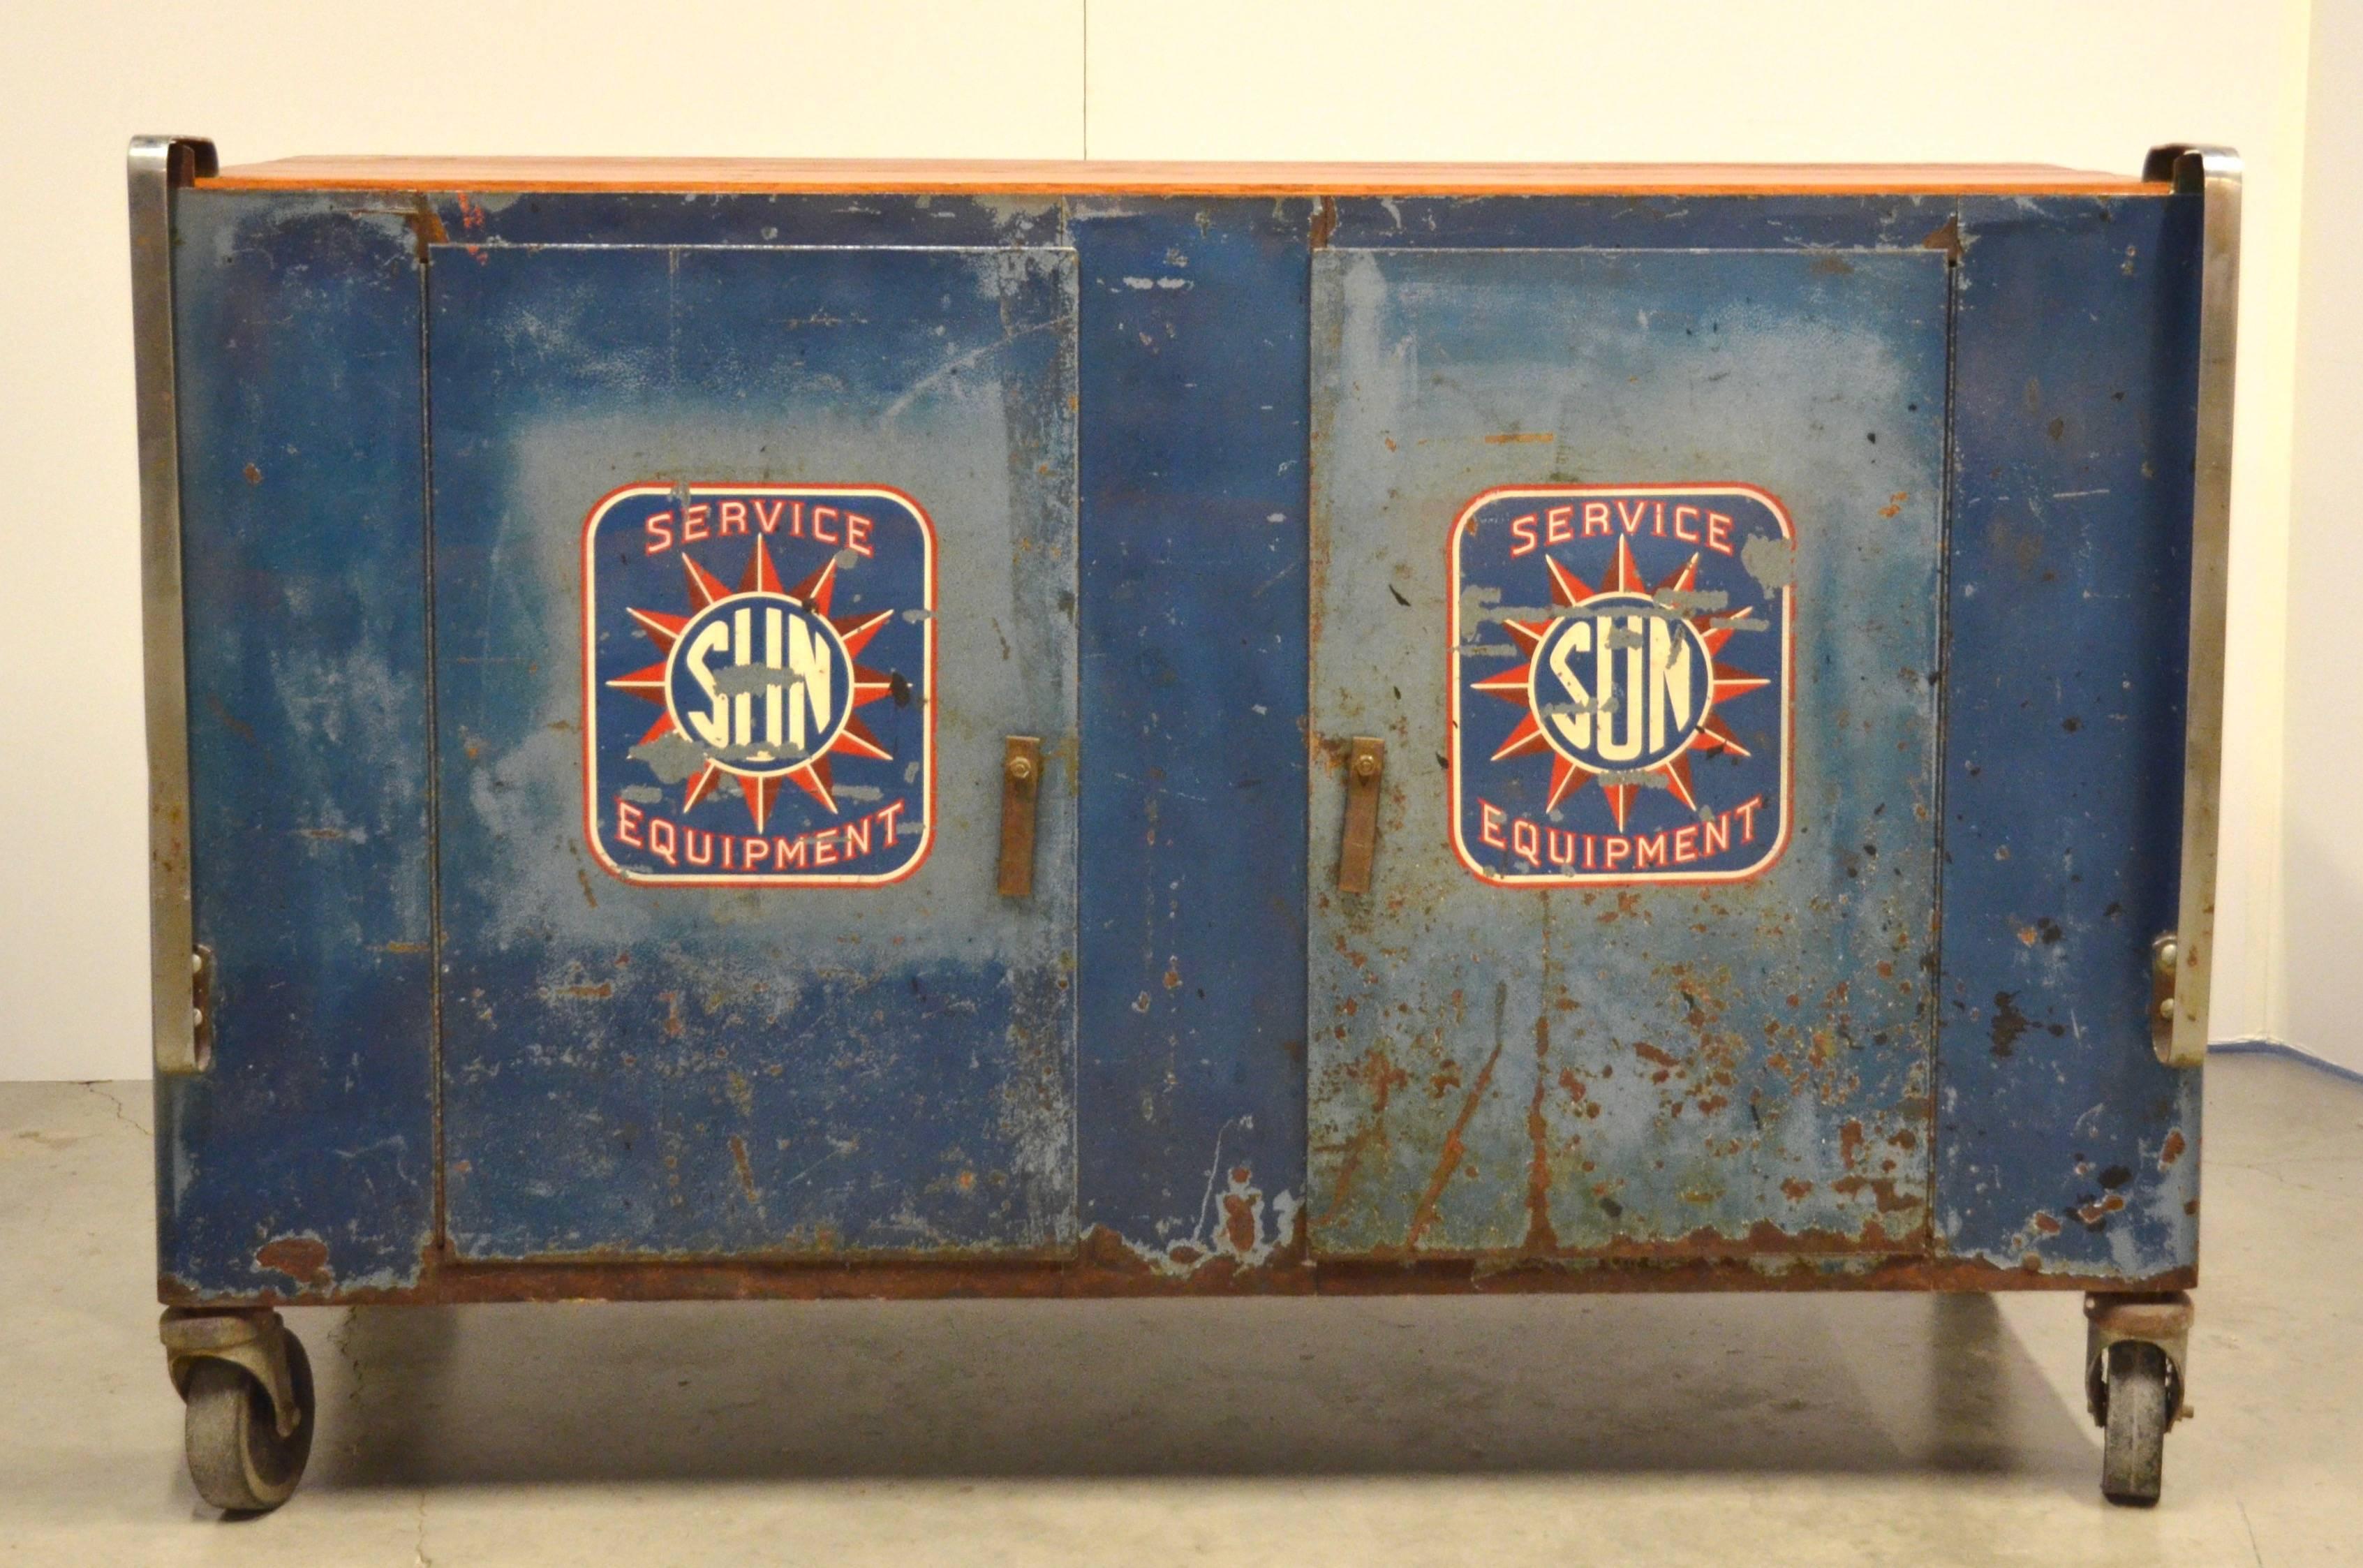 Sun Automotive equipment represents a great American company’s commitment to quality, customer service, and exceptional value. These old cabinets are built like tanks and are sought after by collectors. On wheels, the casters are heavy duty - just